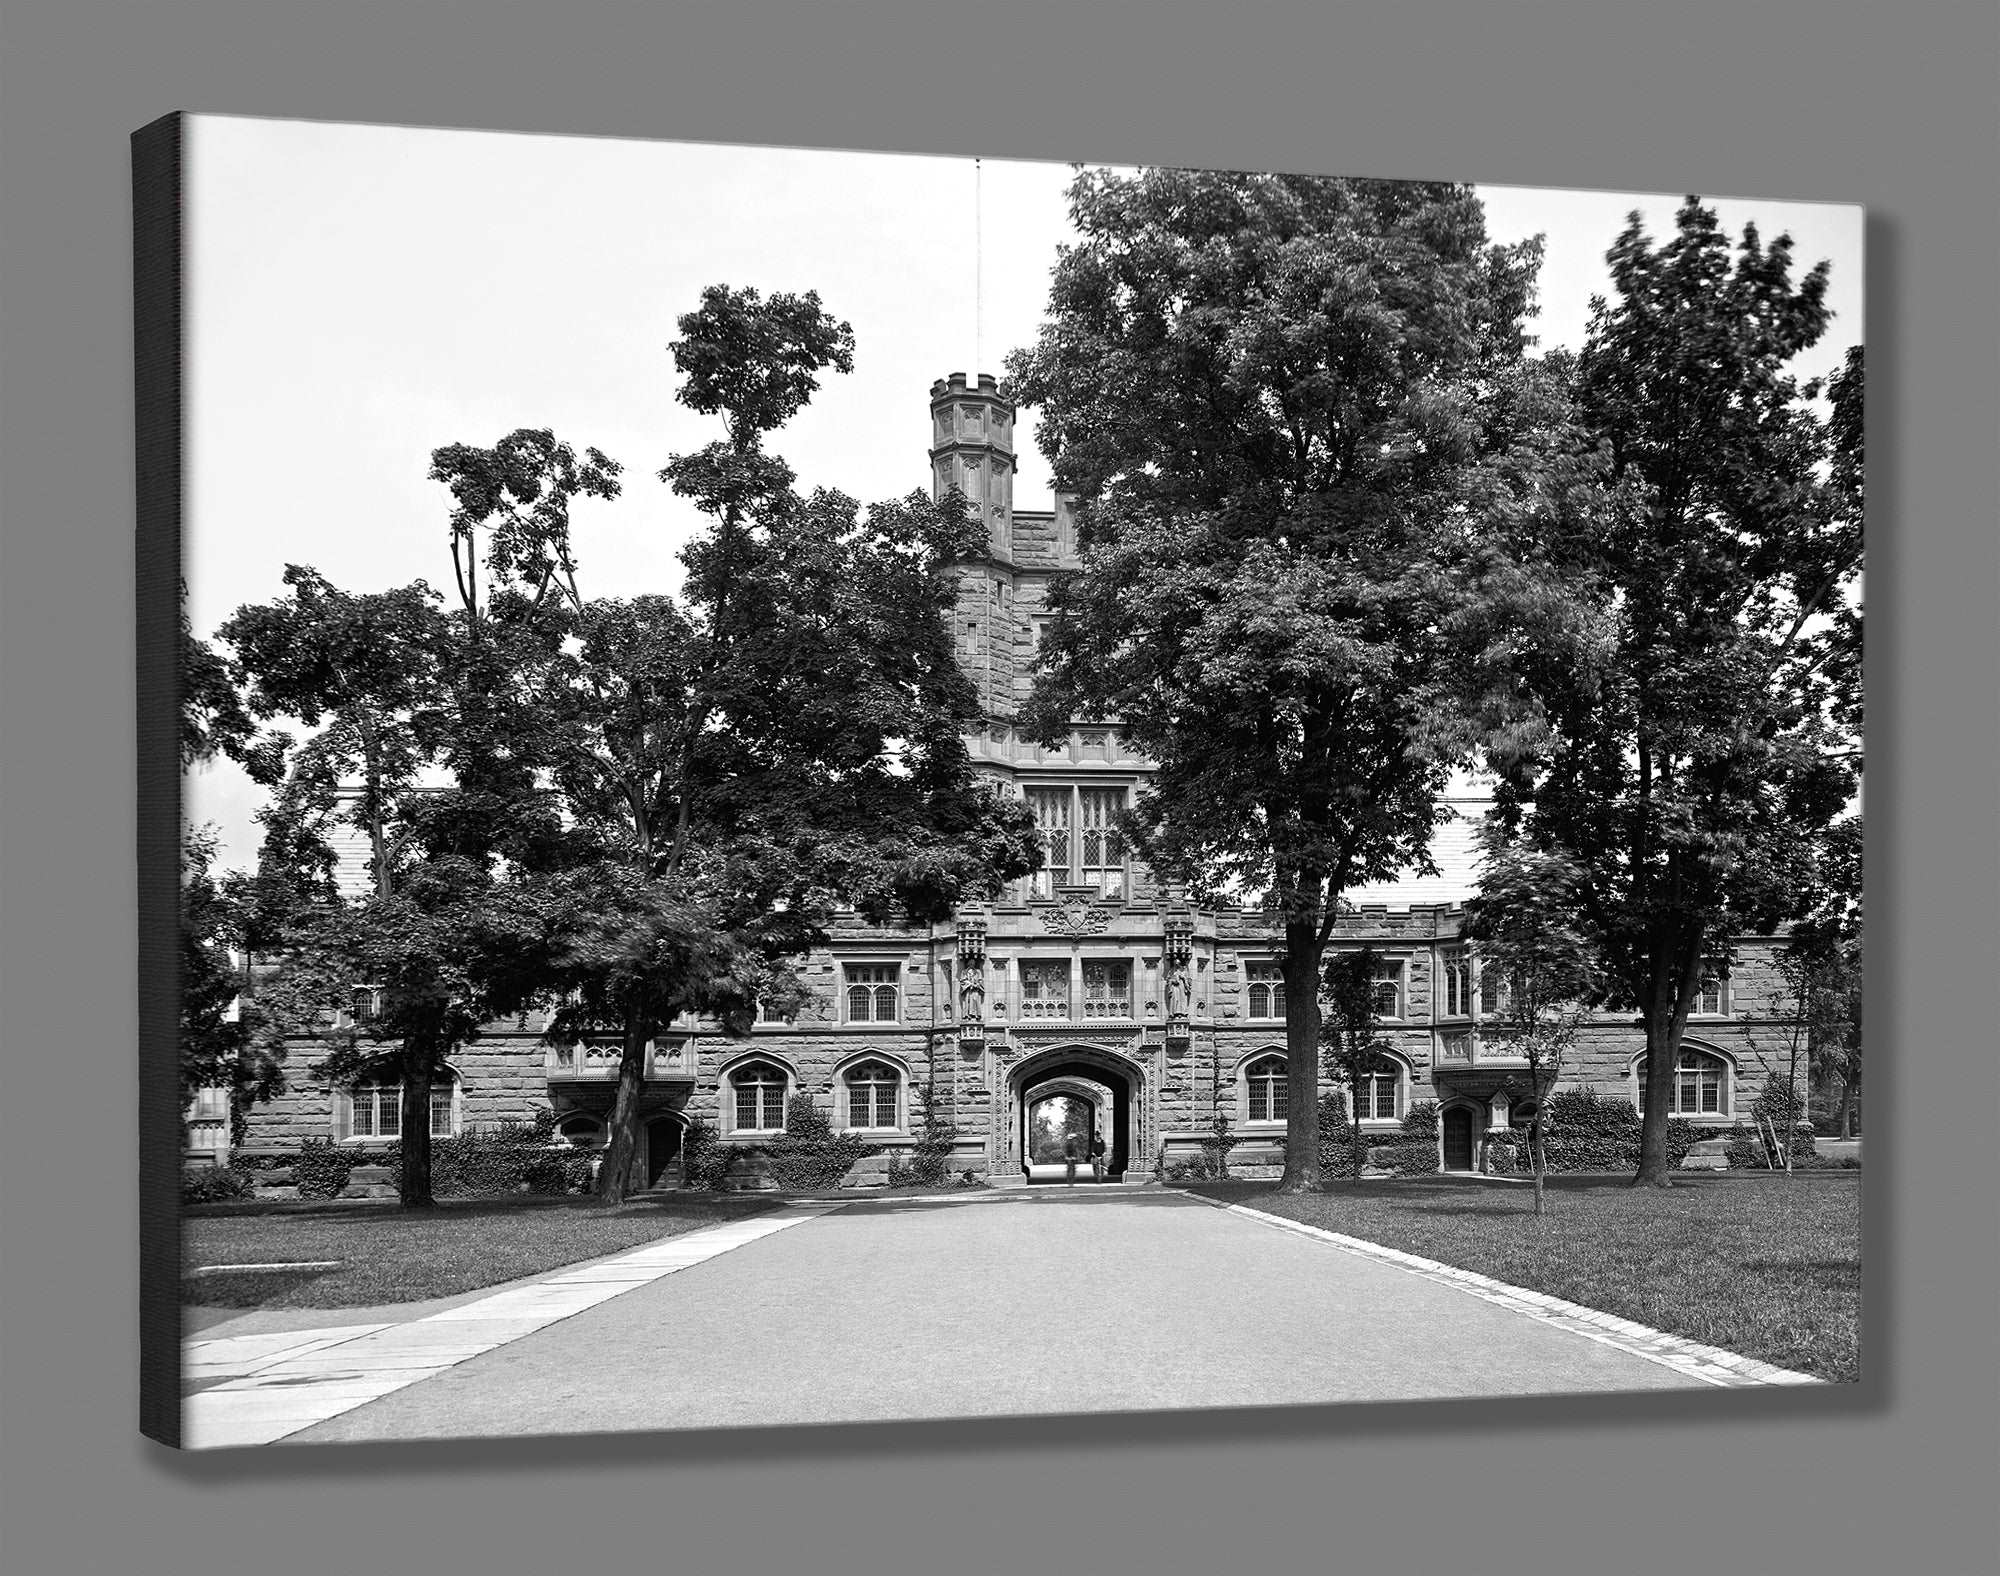 A canvas print of a vintage photograph of Princeton University's Library